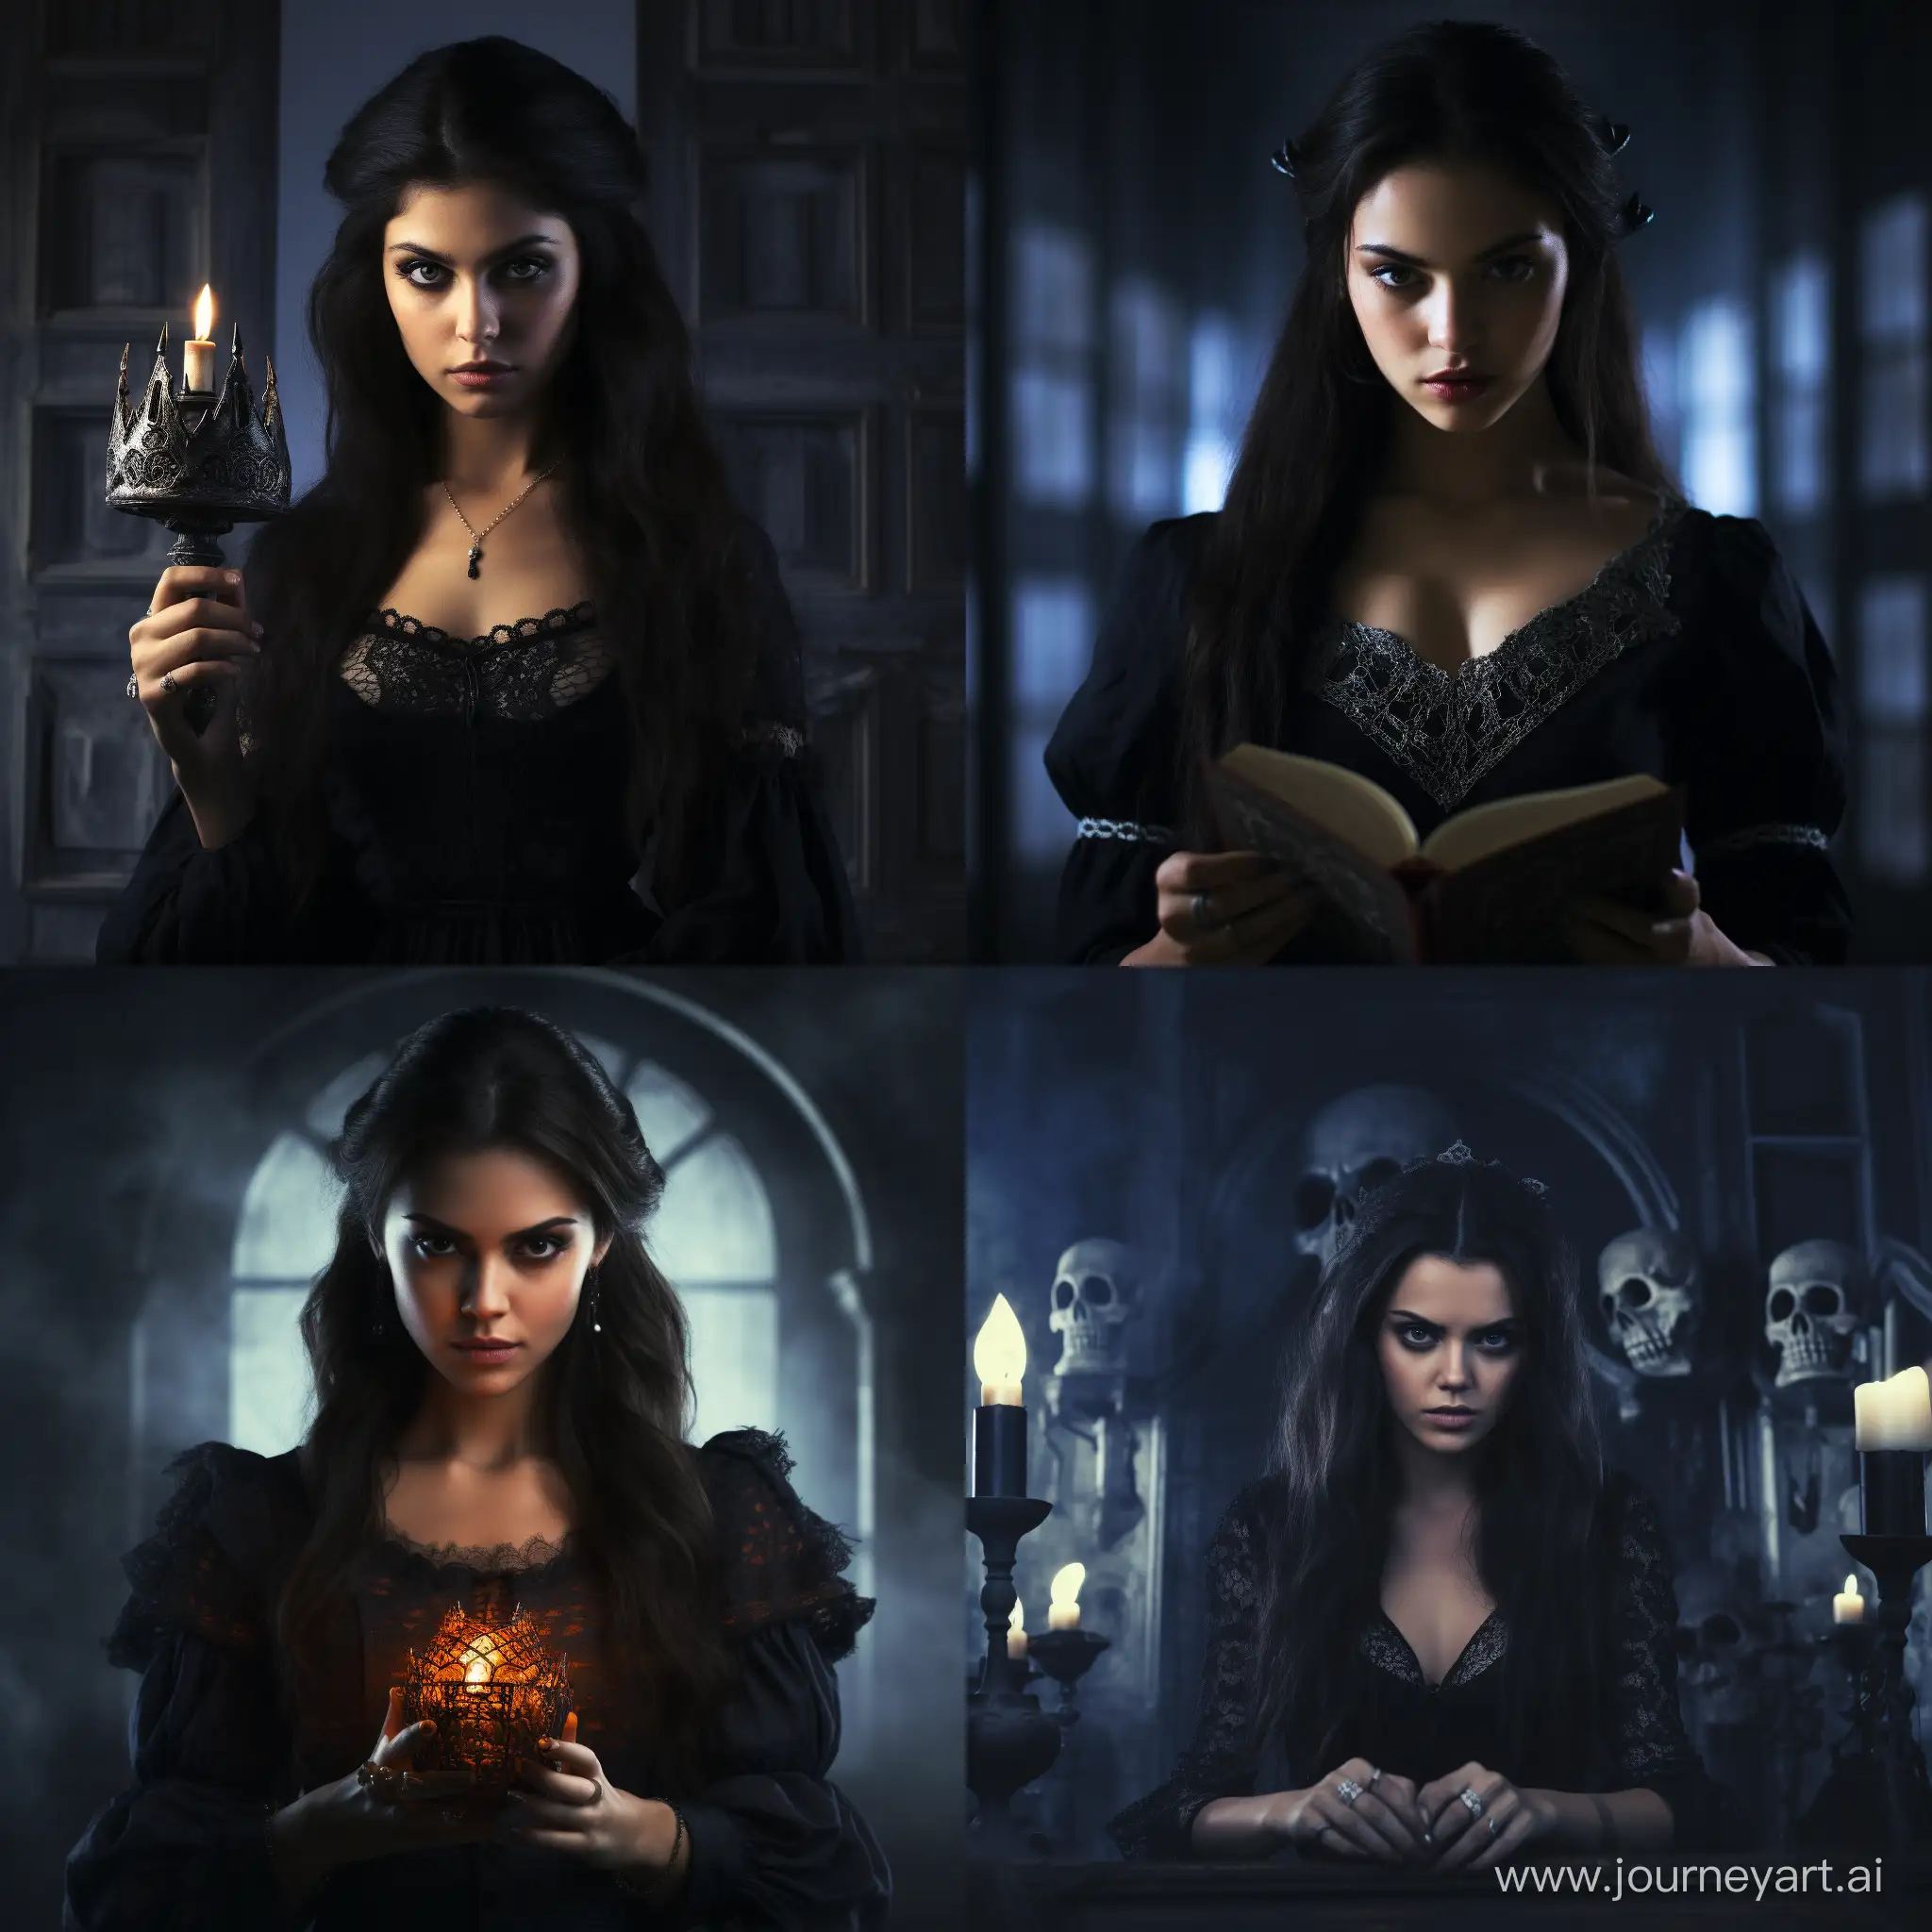 DarkHaired-Sorceress-Casting-a-Mysterious-Spell-in-11-Aspect-Ratio